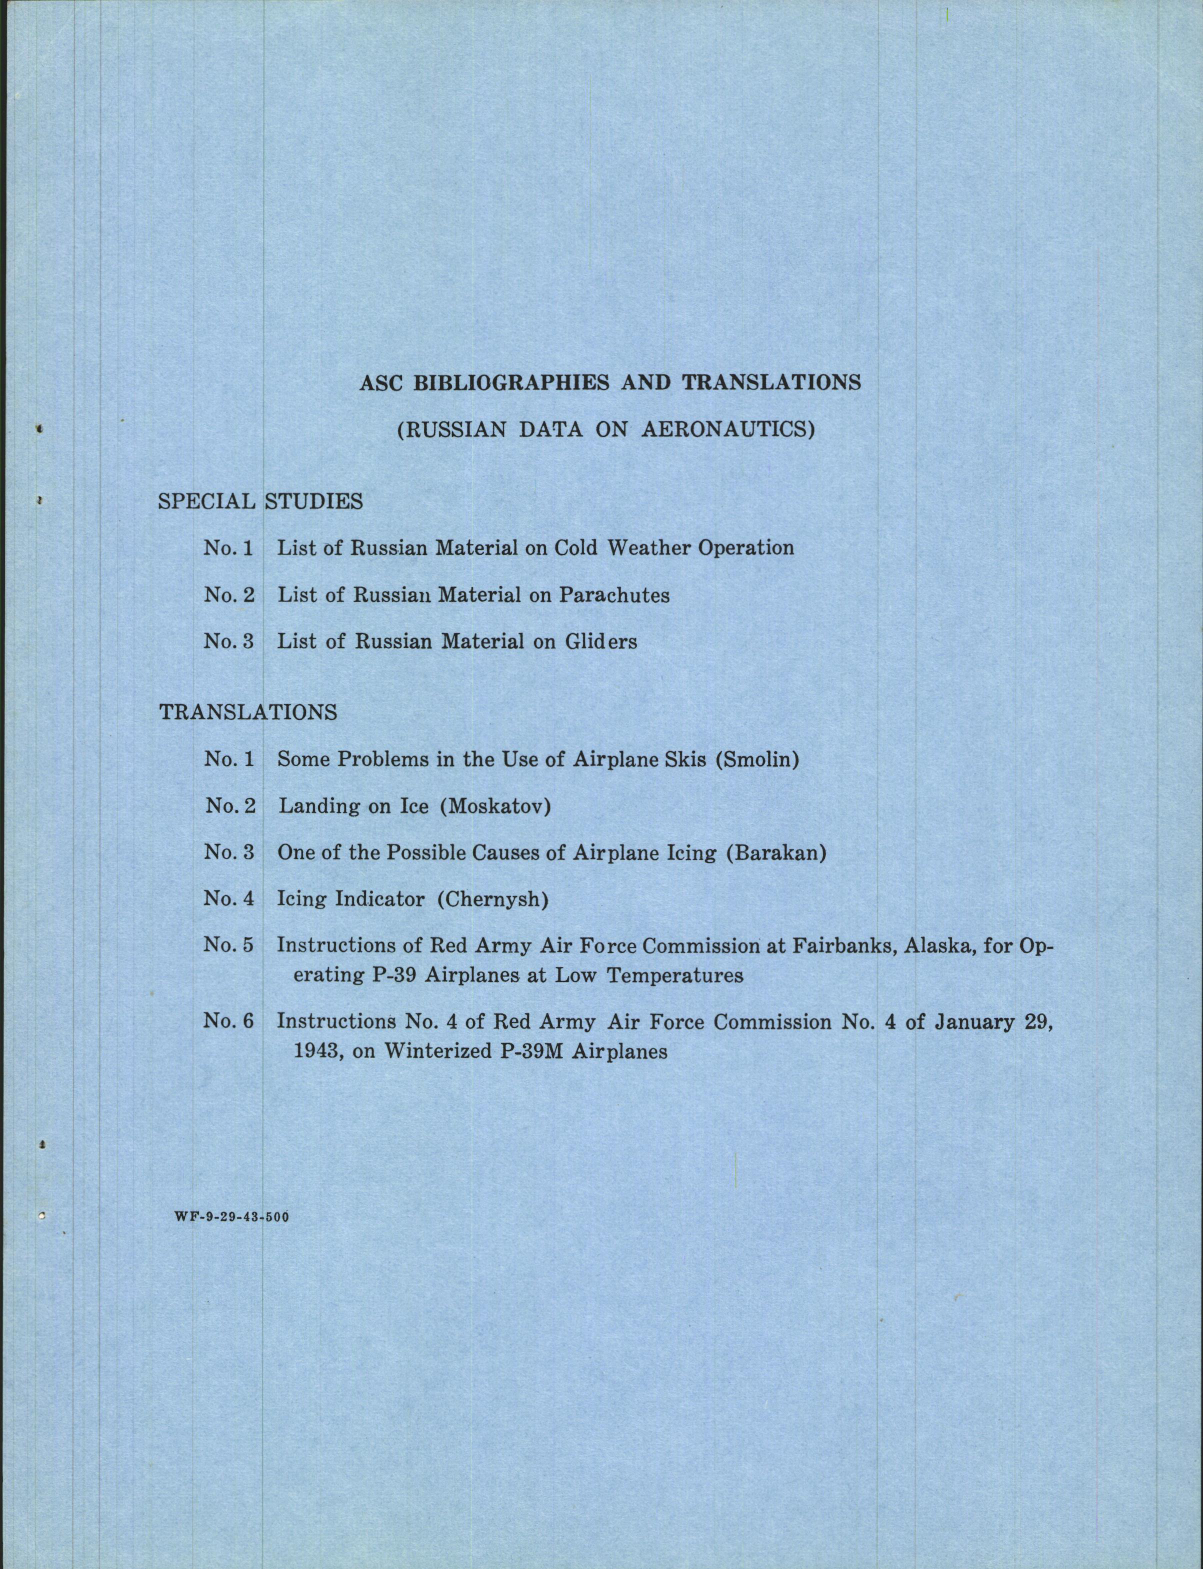 Sample page 7 from AirCorps Library document: Instructions of Red Army Air Force Commission No. 4 on Winterized P-39M Airplanes